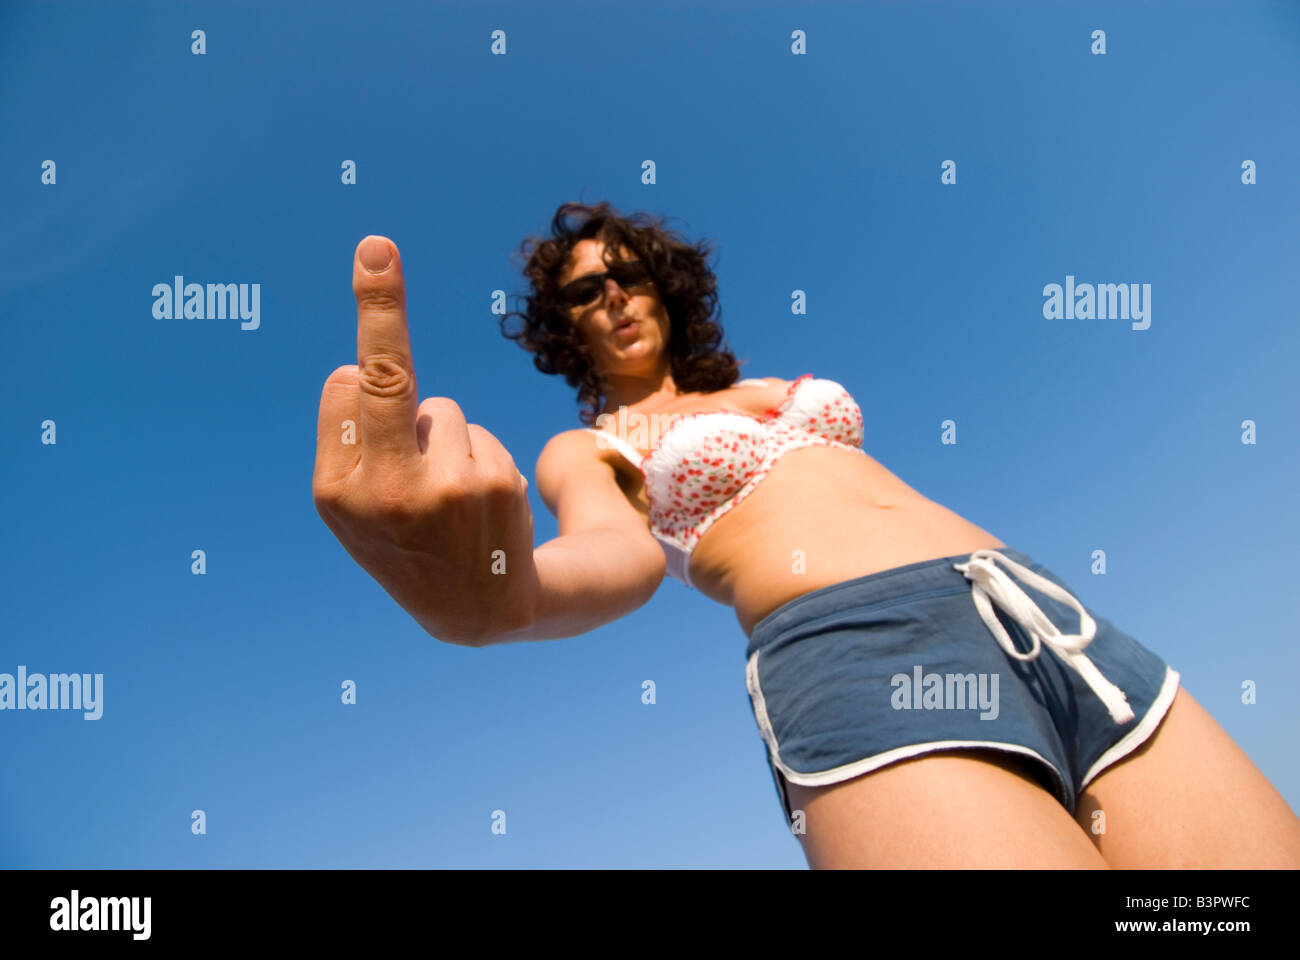 Model Released Female forming an abusive middle finger sign dressed in beachwear Low angle focus on hand Stock Photo